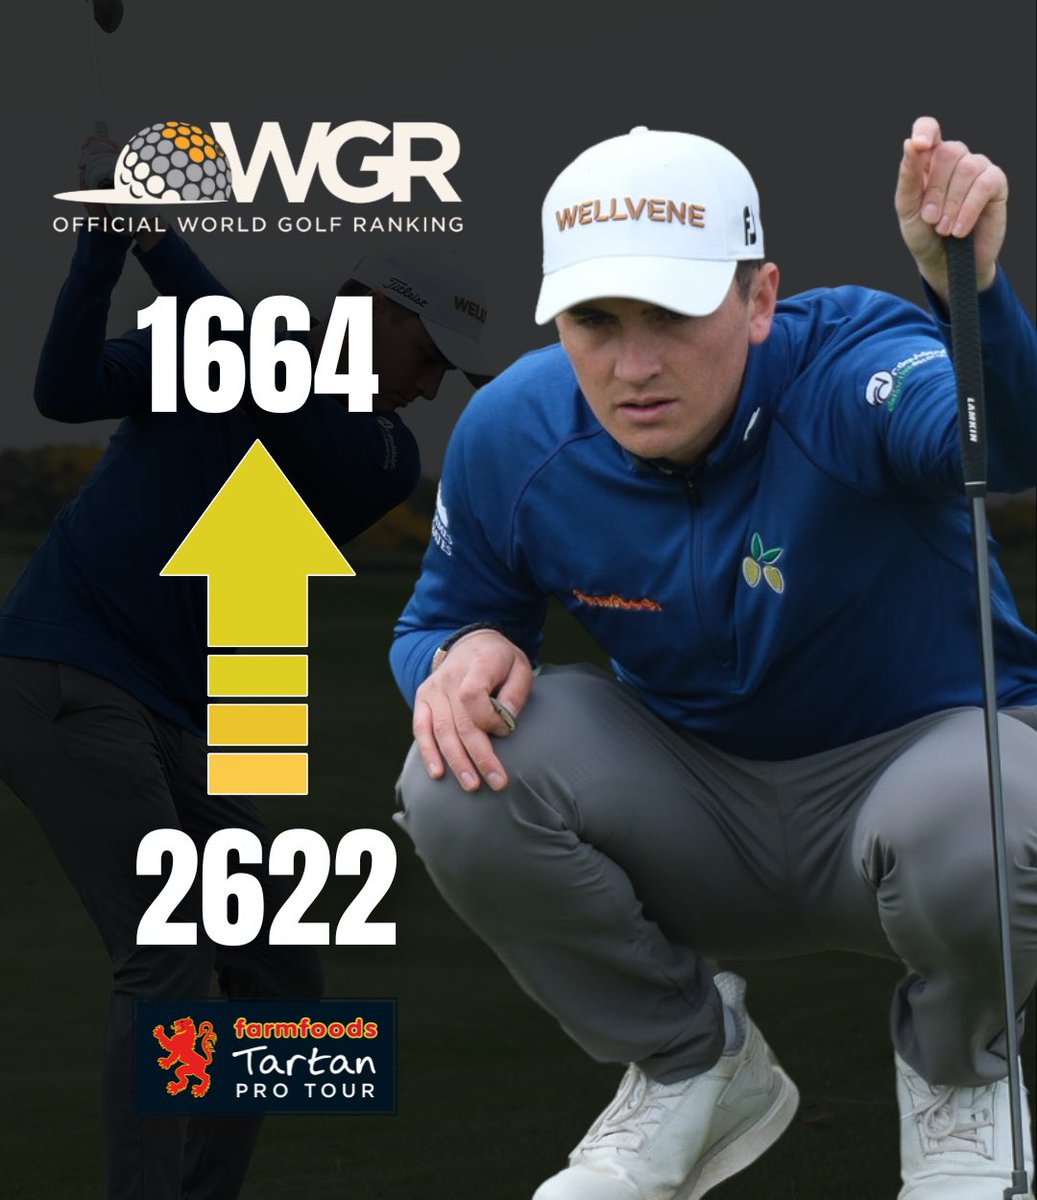 Moving up the ranks 📈 @samlockegolf moves up 958 places in the Official World Golf Rankings after winning the Montrose Links Masters presented by Gym Rental Company #OfficialFeederTour